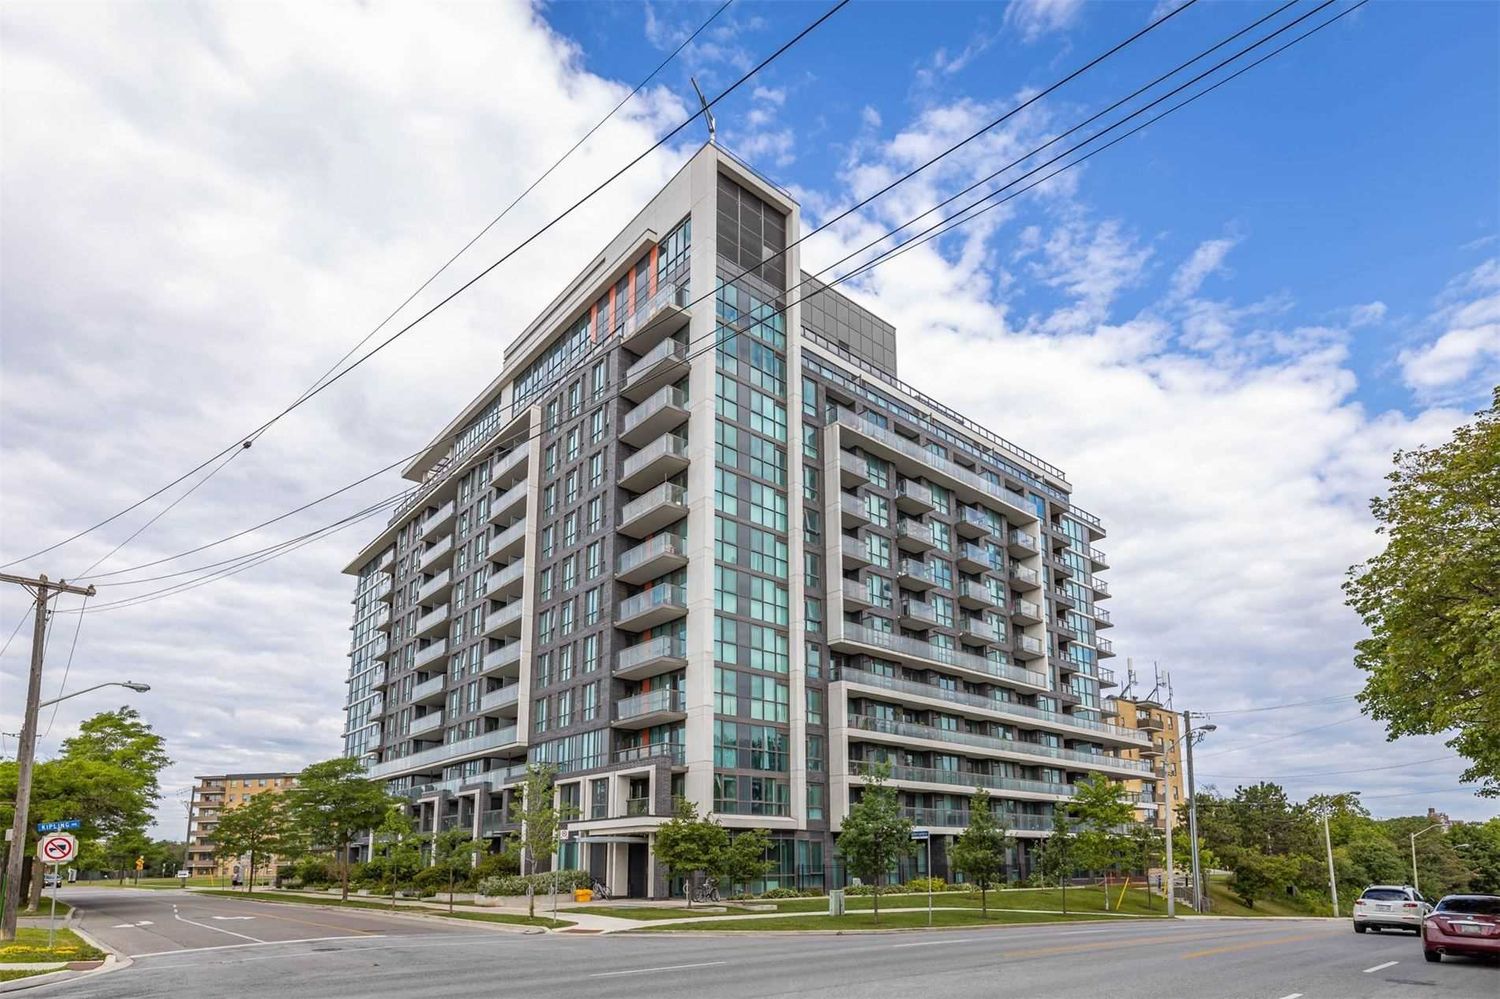 80 Esther Lorrie Drive. Cloud 9 Condos is located in  Etobicoke, Toronto - image #1 of 3